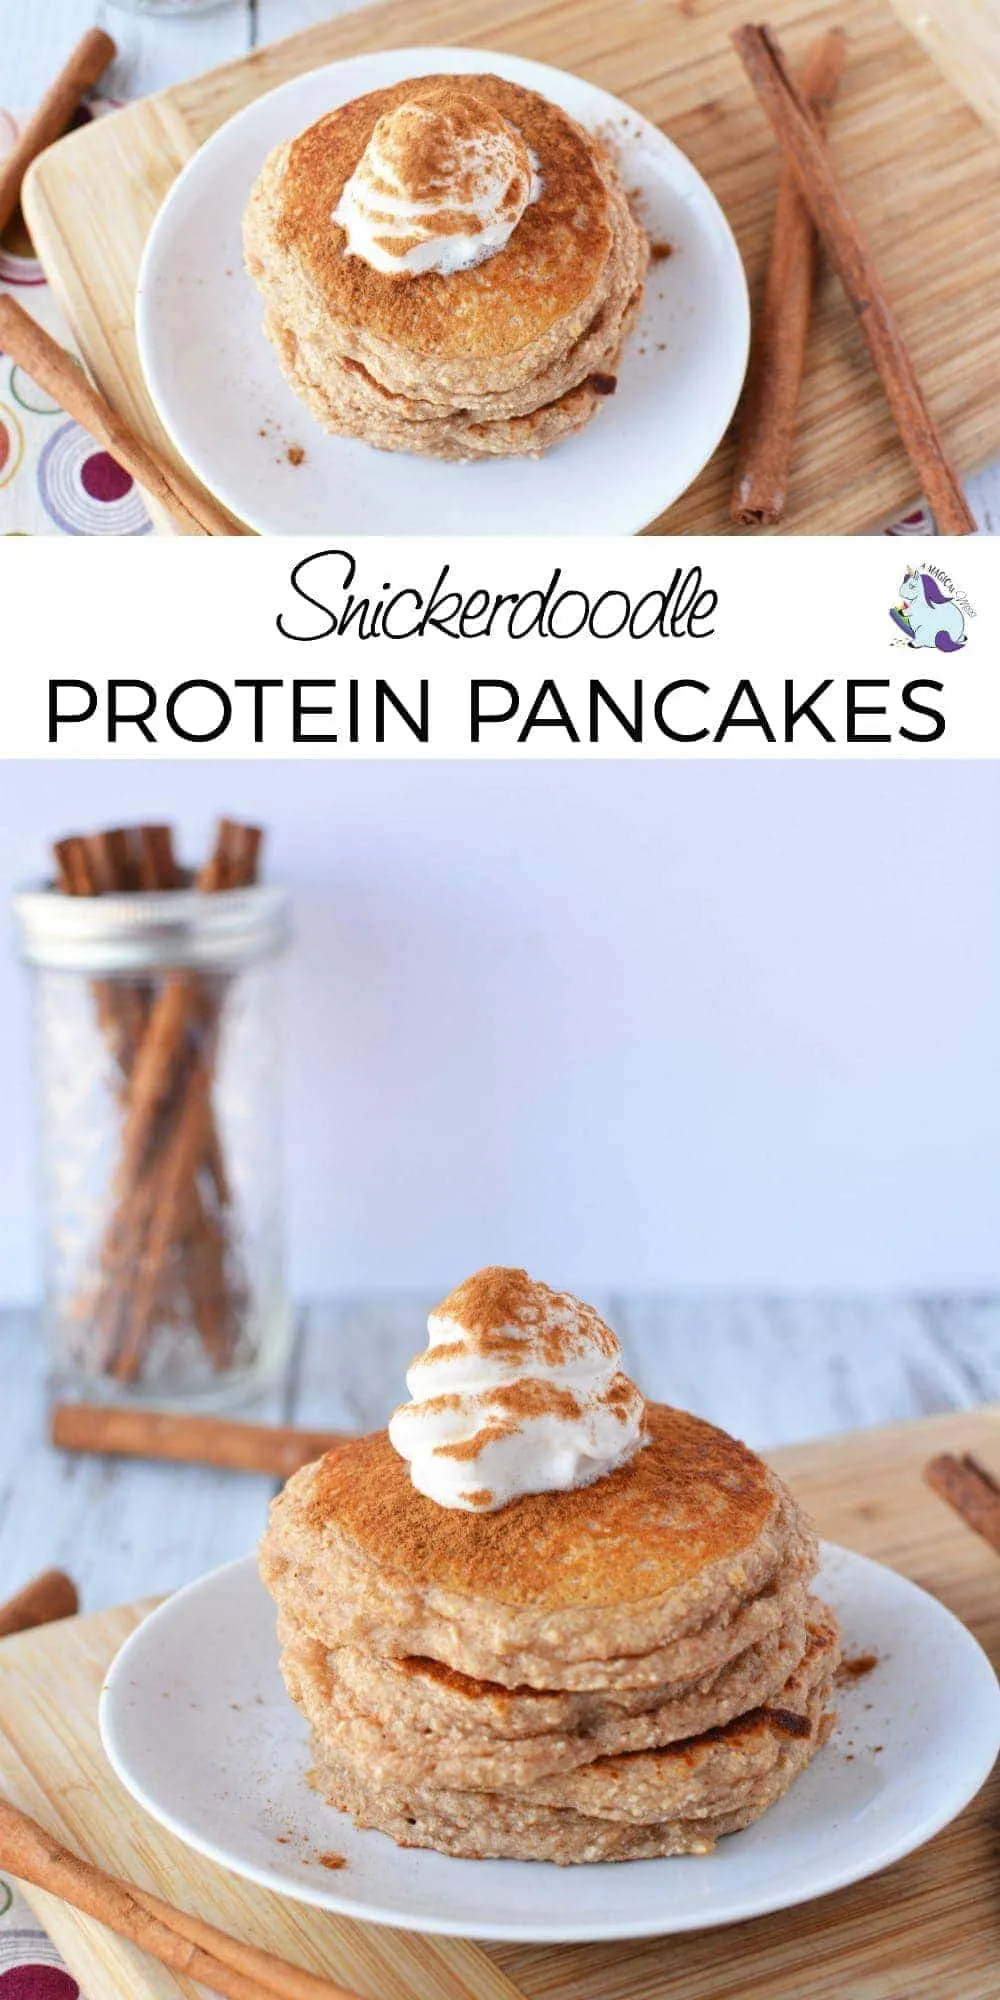 Protein pancakes with whipped cream surrounded by cinnamon sticks.